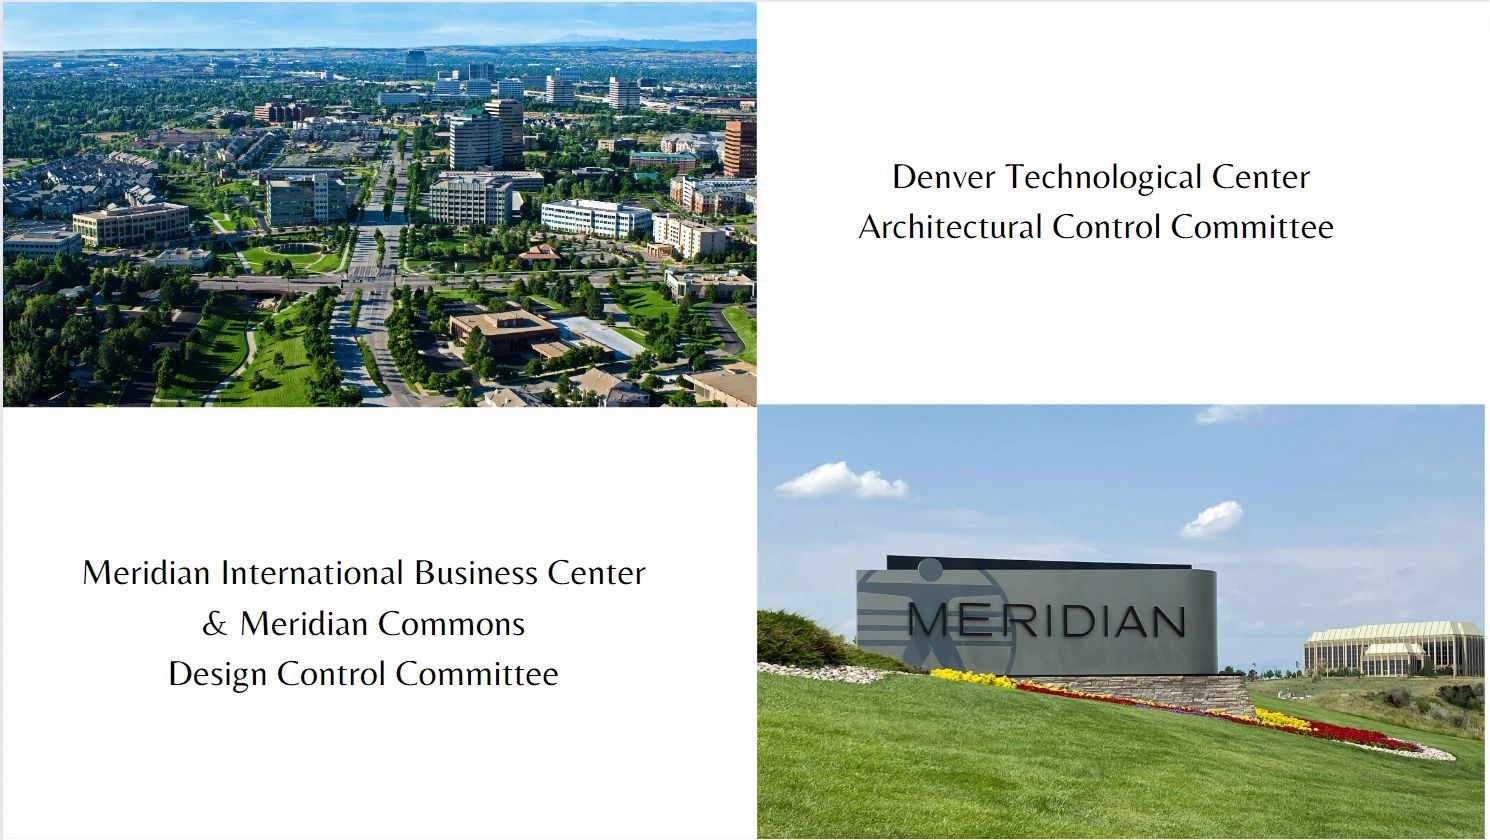 Denver Tech Center view and Meridian monument.